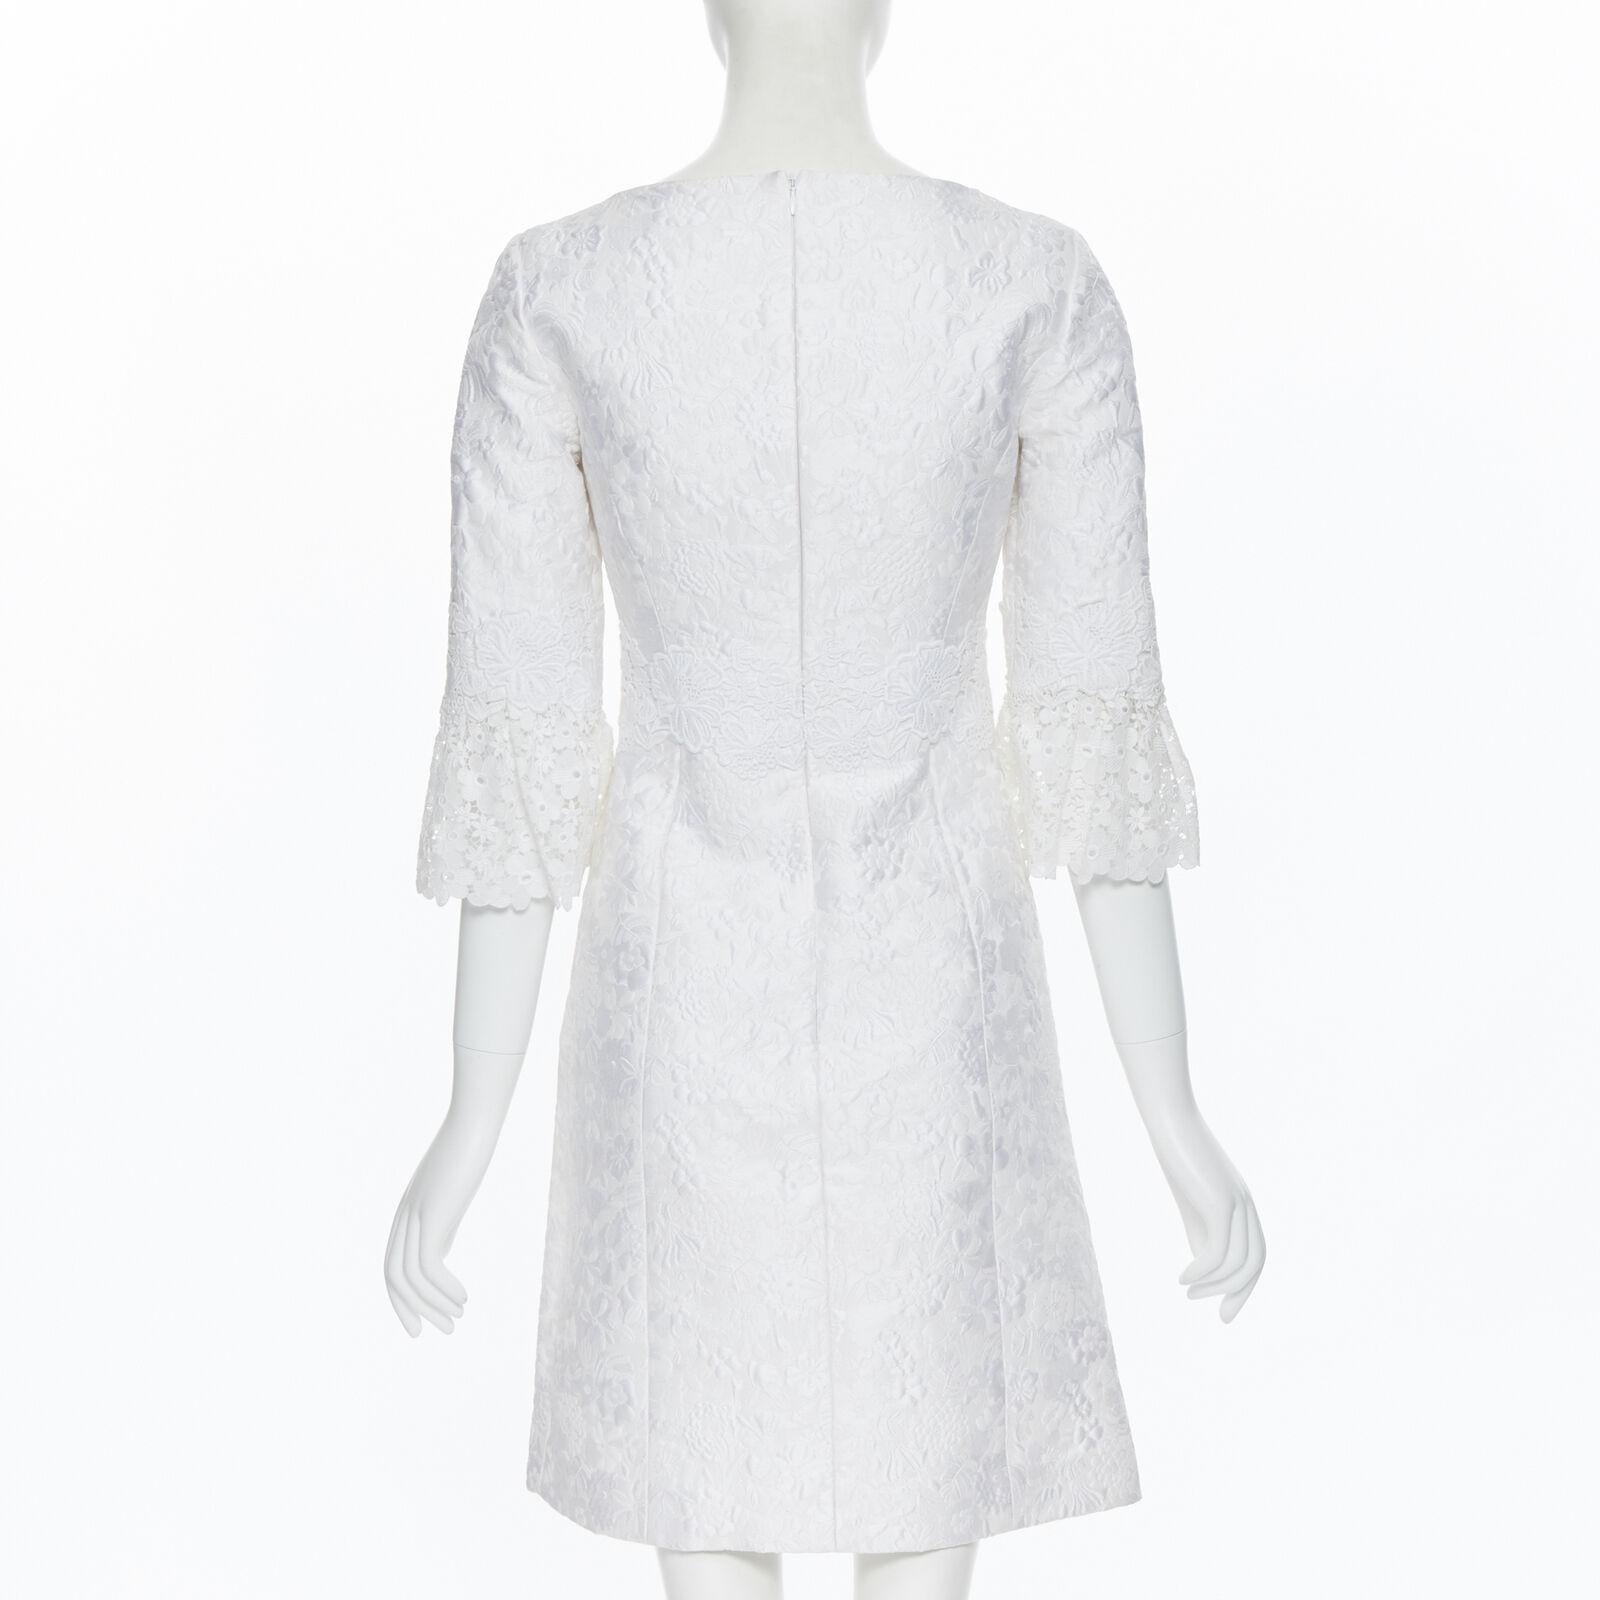 MICHAEL KORS COLLECTION white floral cloque lace trimmed 3/4 sleeve dress US0 For Sale 1